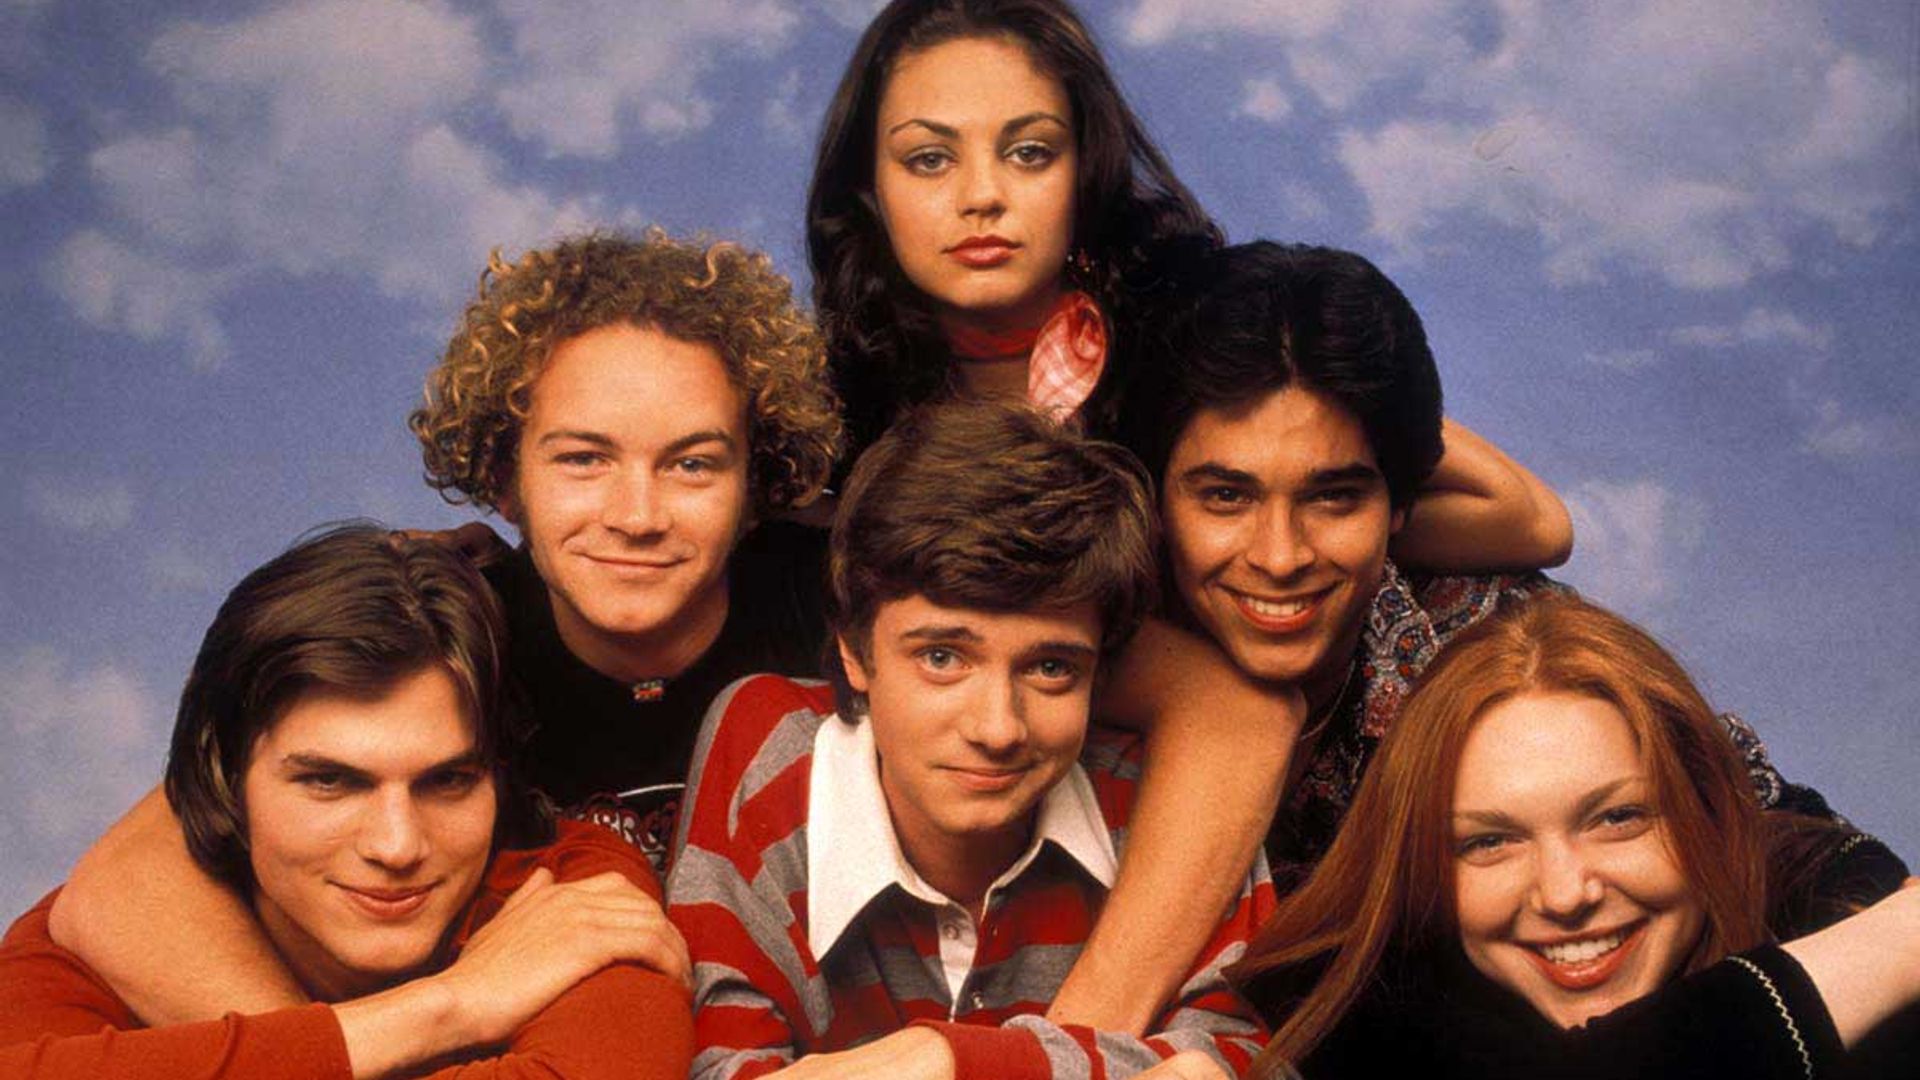 That '70s Show then vs now See how the cast has changed over the years